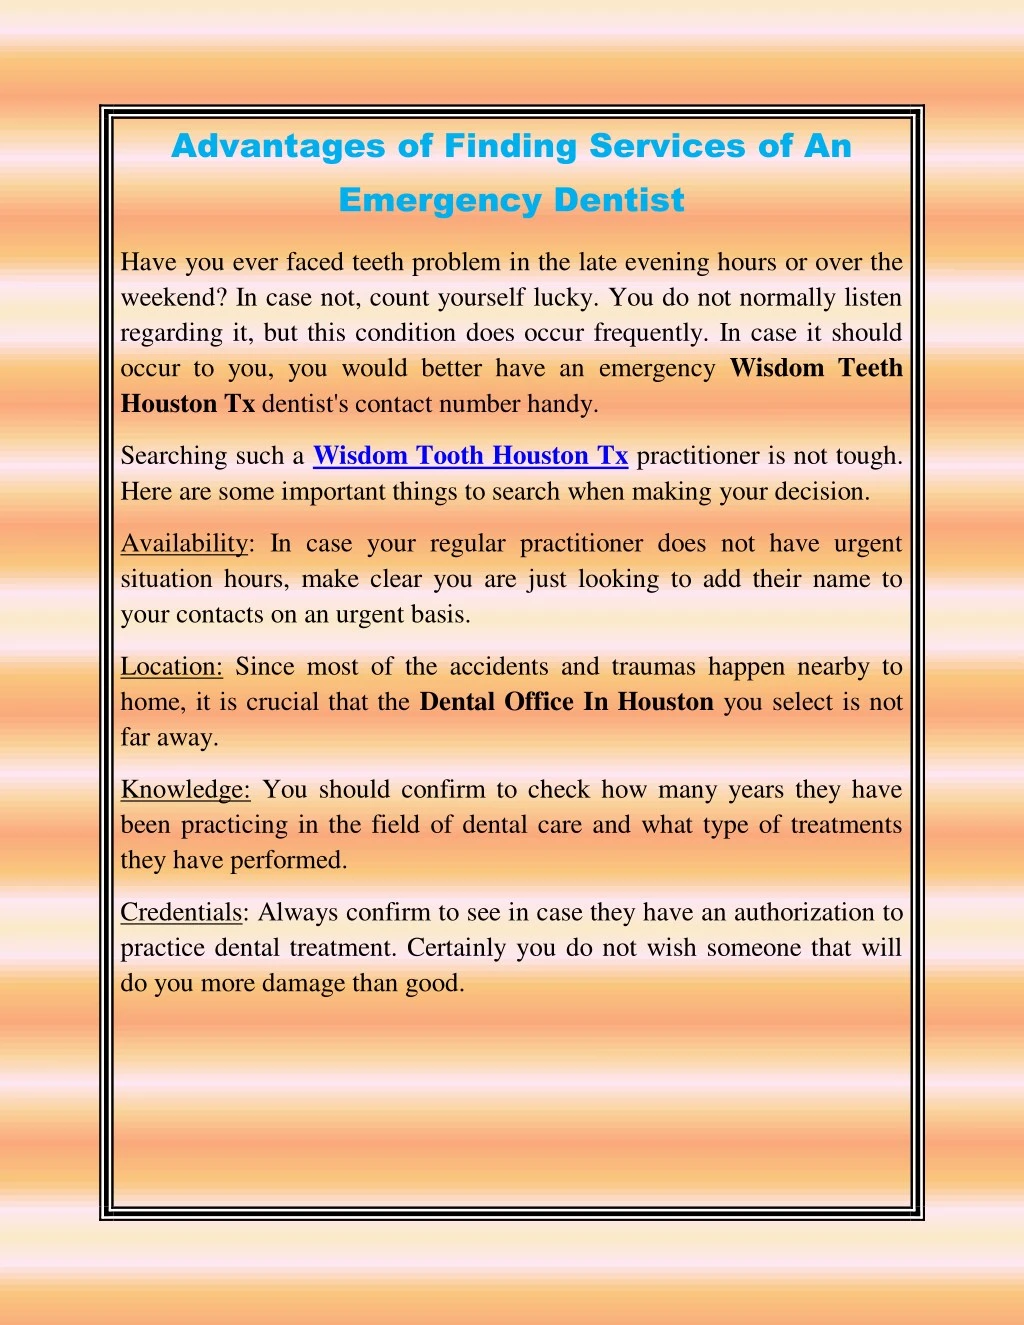 advantages of finding services of an emergency